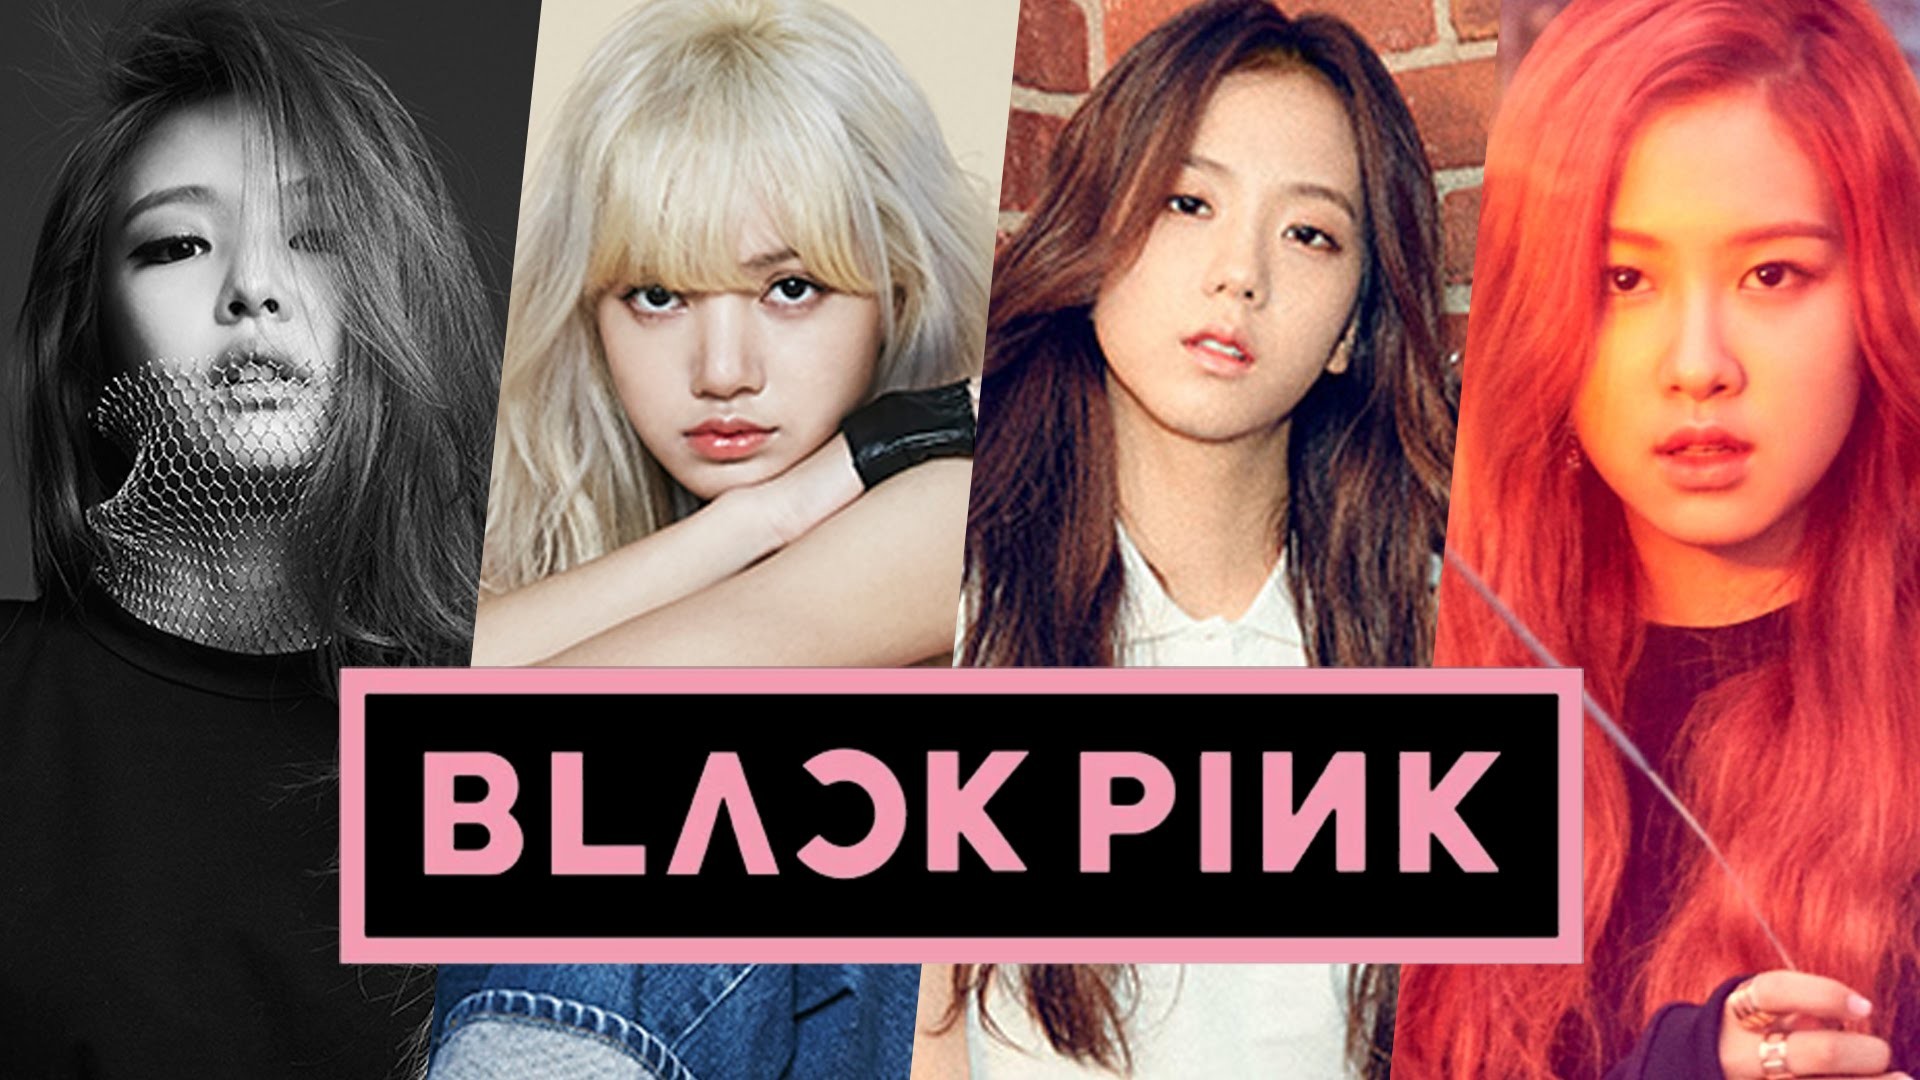 1920x1080 [KSTYLE TV] BLACKPINK, Who Are You? (YG's New Girl Group) - YouTube